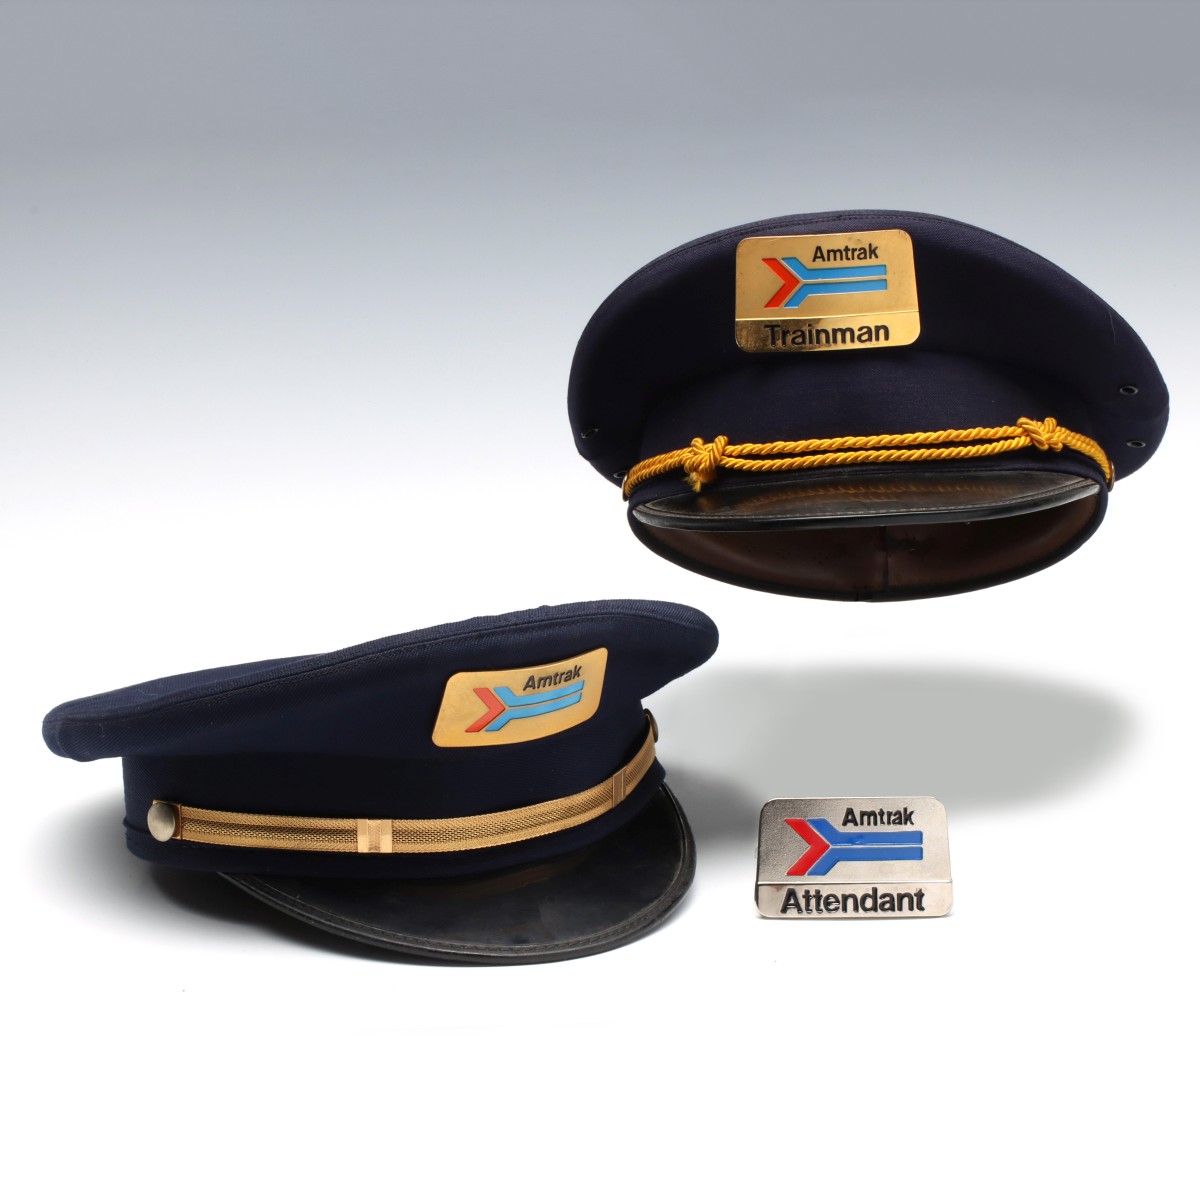 TWO AMTRAK VISOR CAPS AND AN ATTENDANT'S BADGE